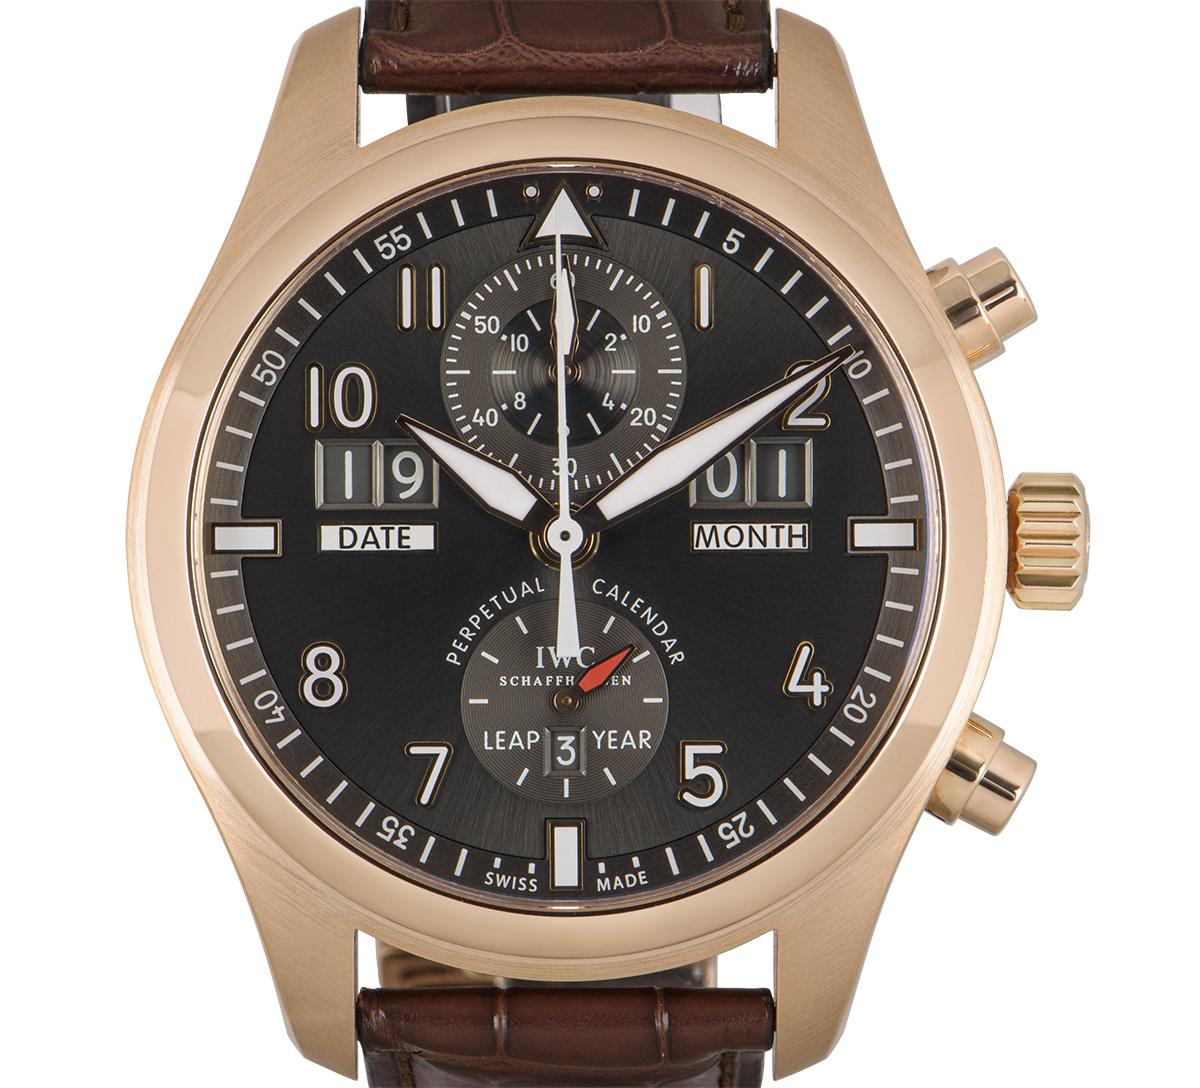 A 46 mm Pilot's Spitfire Perpetual Calendar in rose gold originally released by IWC in 2013. The slate-coloured dial concealed by a sapphire glass features date, month and leap year displays as well as hour and minute counters. Fitted with the IWC